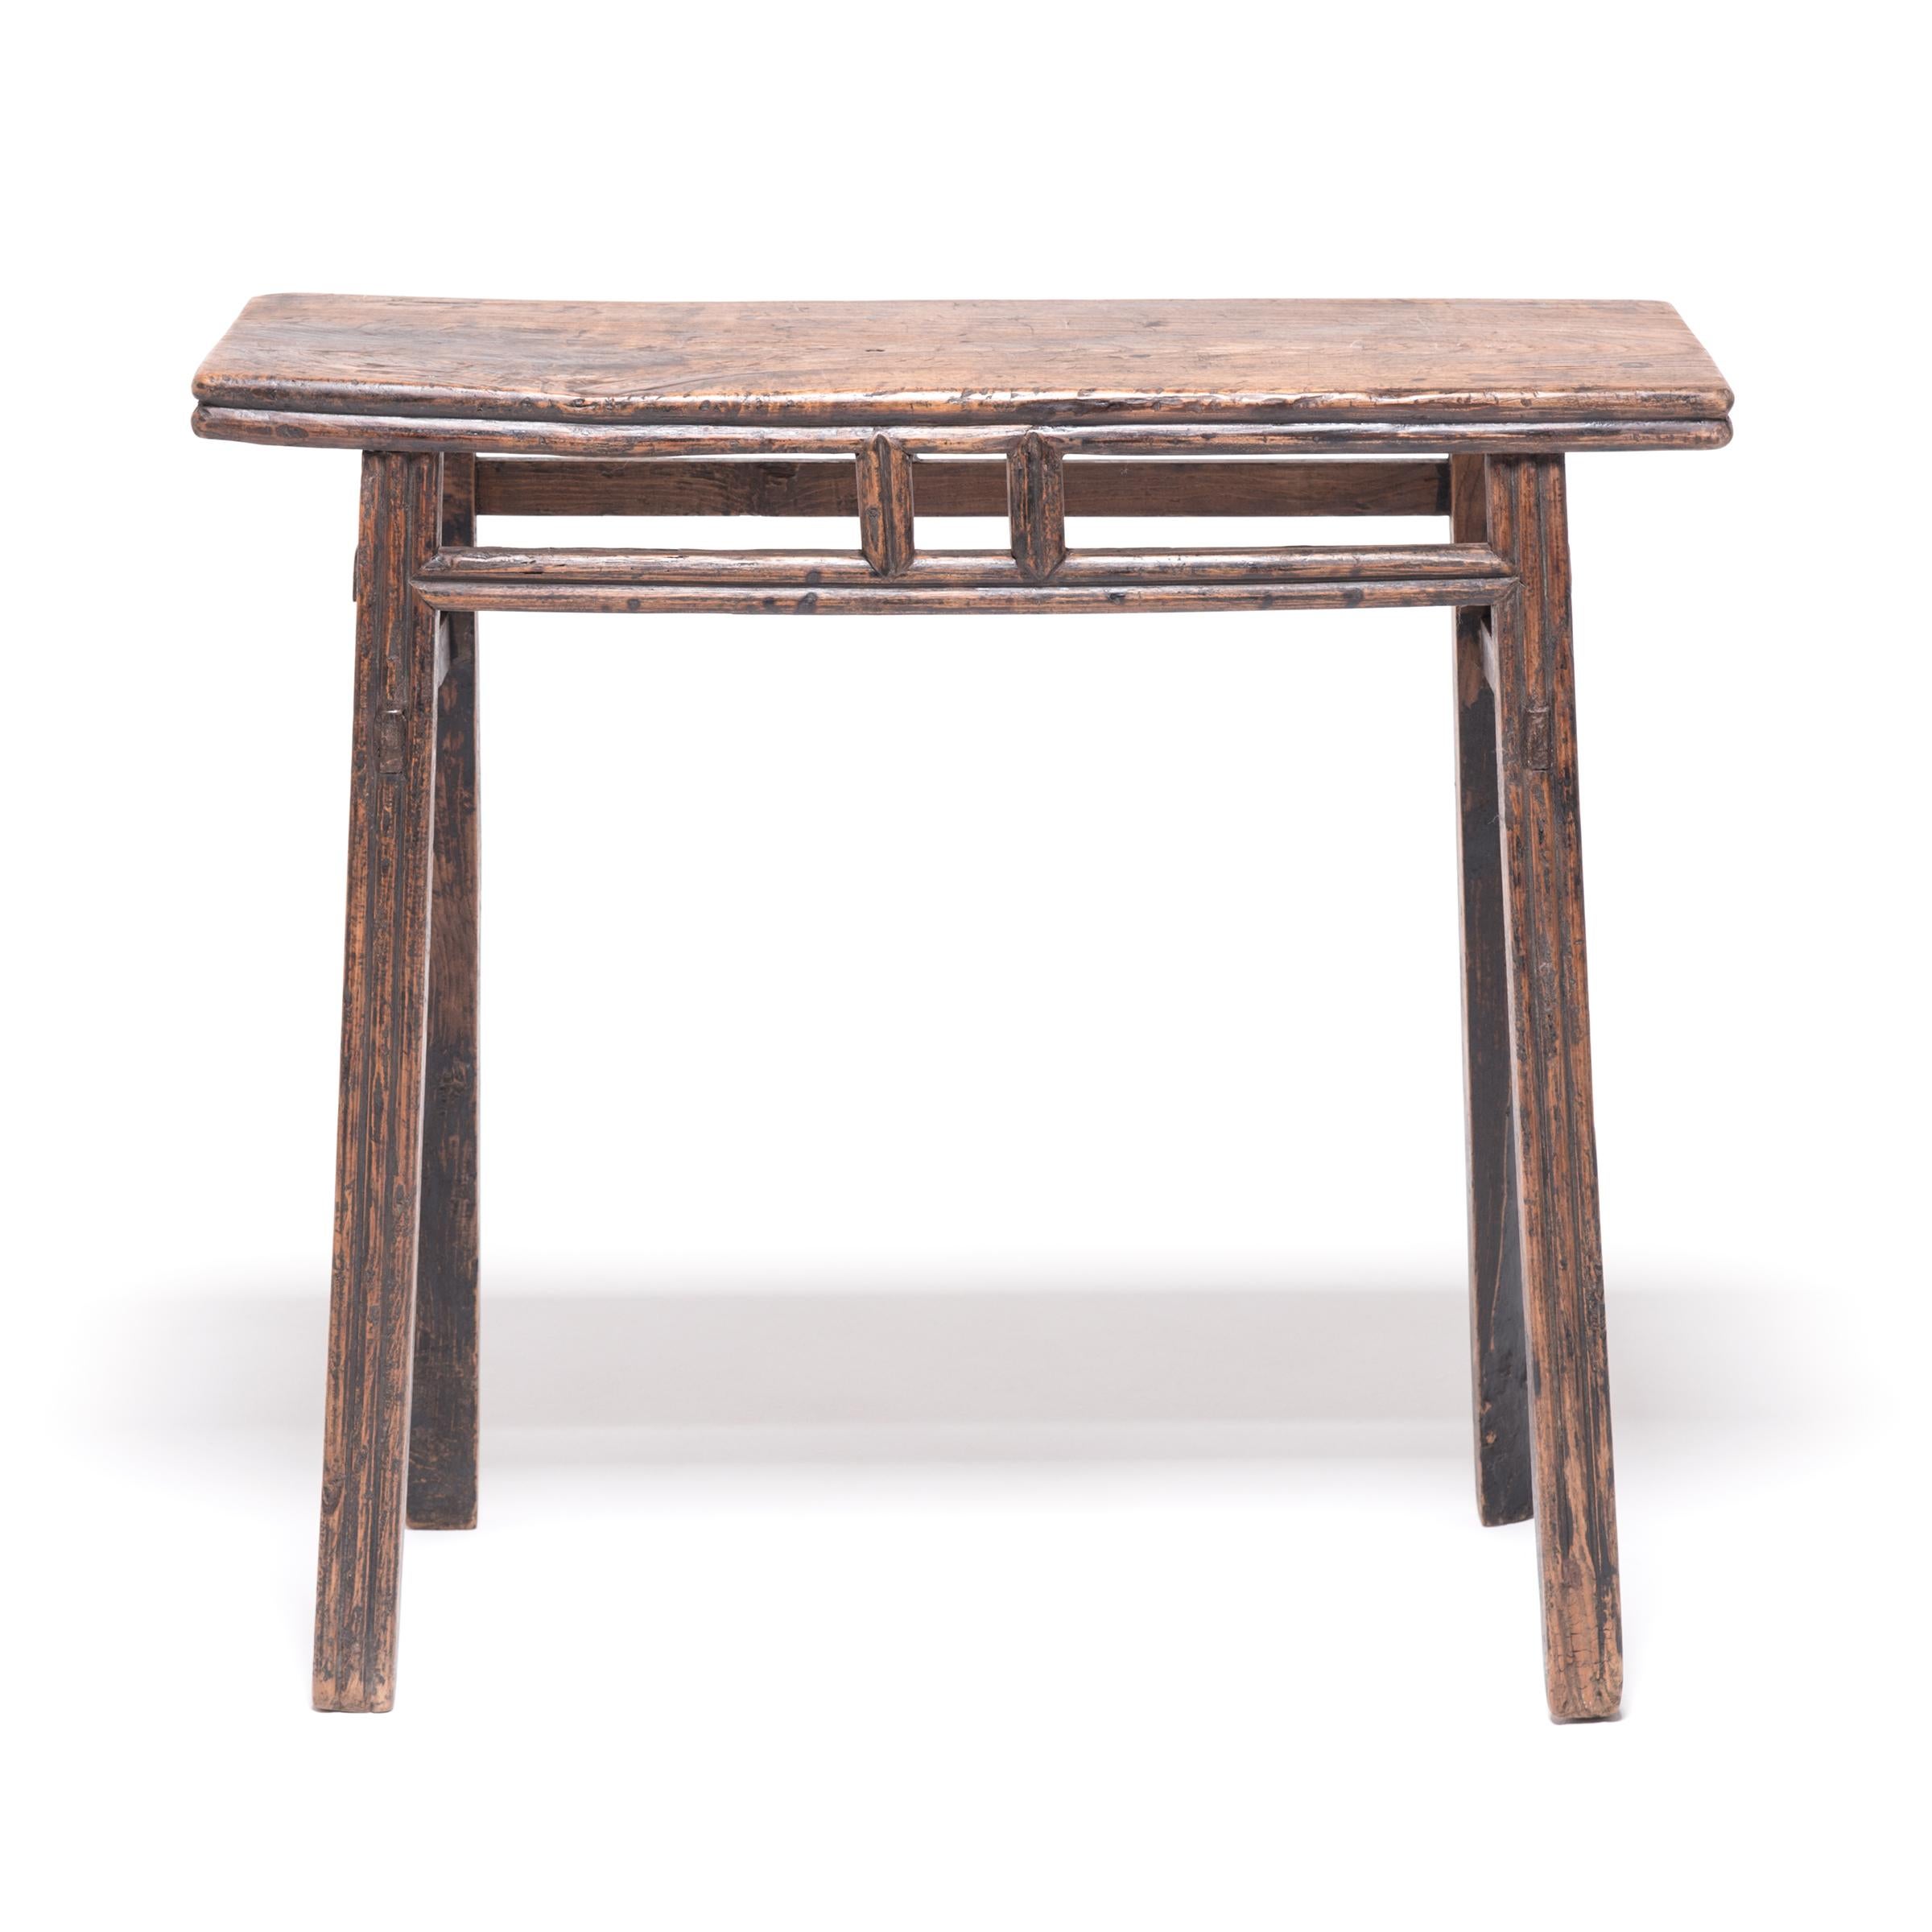 Crafted in China's Shanxi province in the late Qing dynasty, this charming wine table was once a gathering spot for guests to pour wine and make toasts. The table's stretchers and legs were hand rounded to create a barreled form, meant to resemble